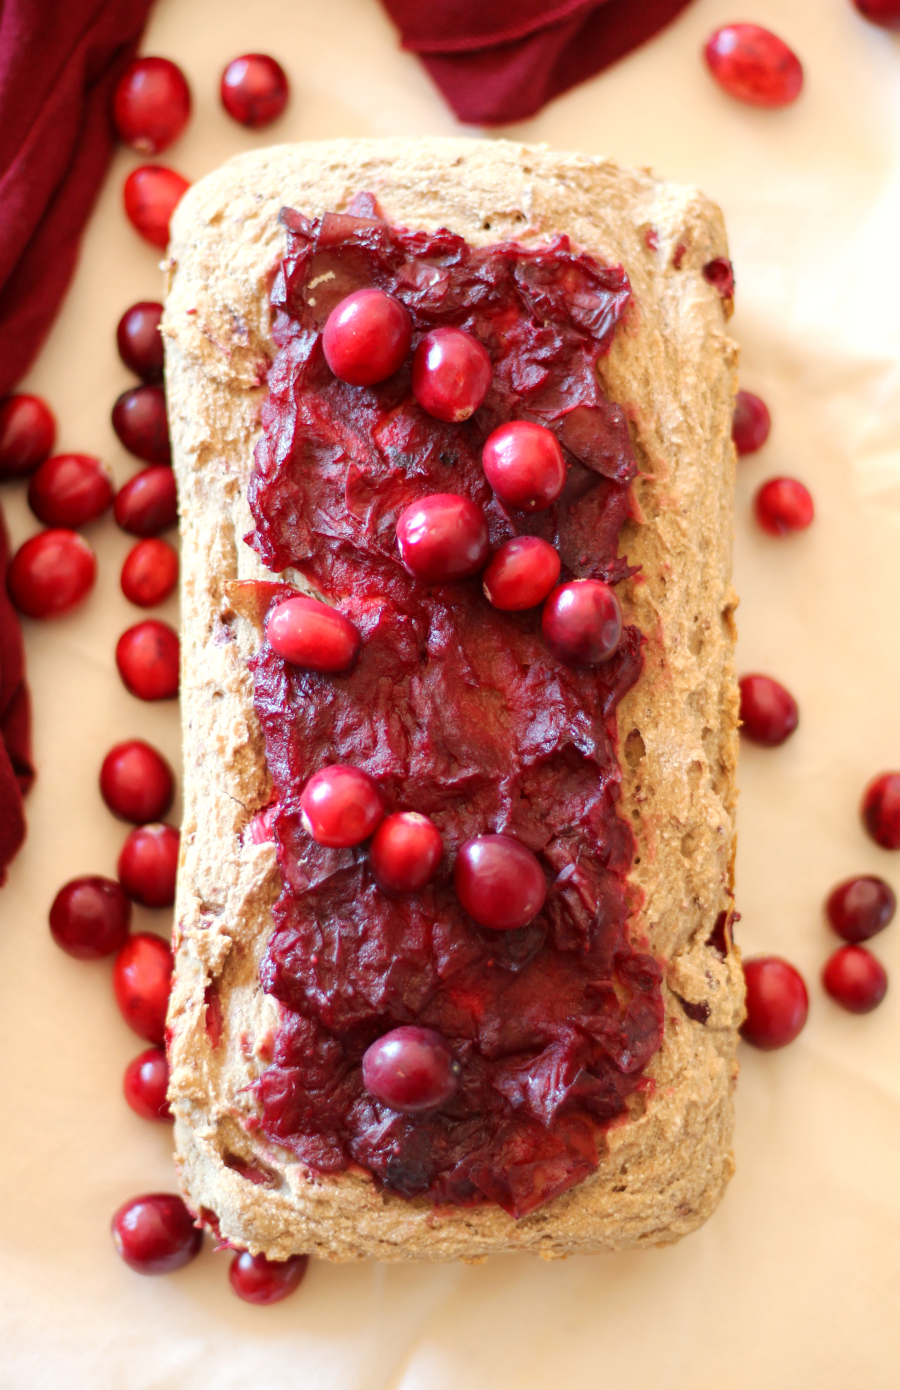 Cranberry Sauce Quick Bread | Strength and Sunshine @RebeccaGF666 Use up your favorite holiday sauce in this healthy quick bread recipe! This Cranberry Sauce Quick Bread uses homemade cranberry sauce and is gluten-free, vegan, allergy-free and perfect for breakfast, brunch, a snack, or dessert!